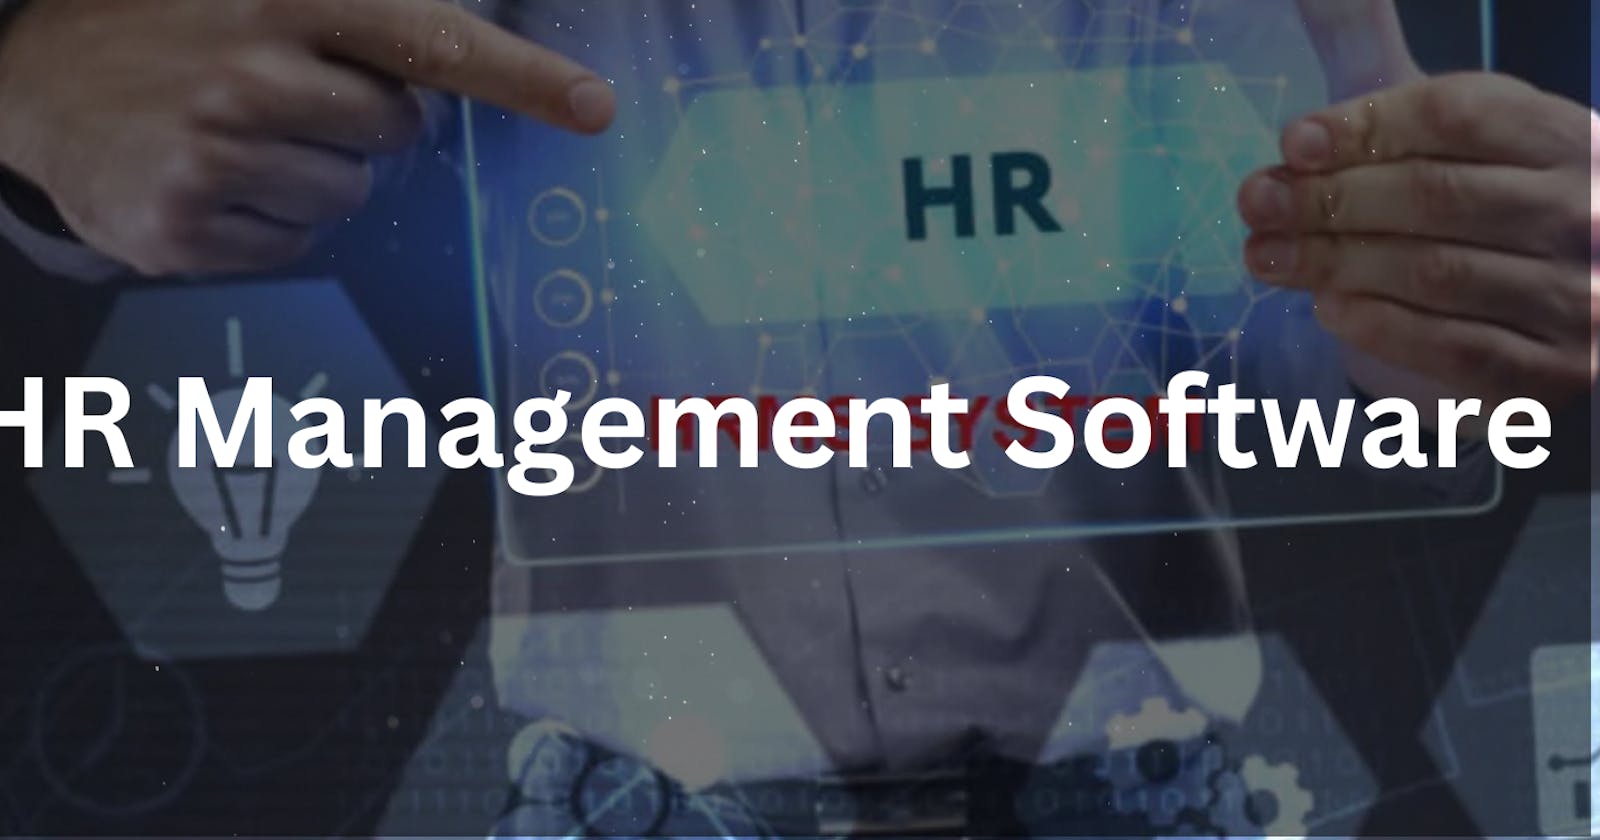 What Is HR Management Software?